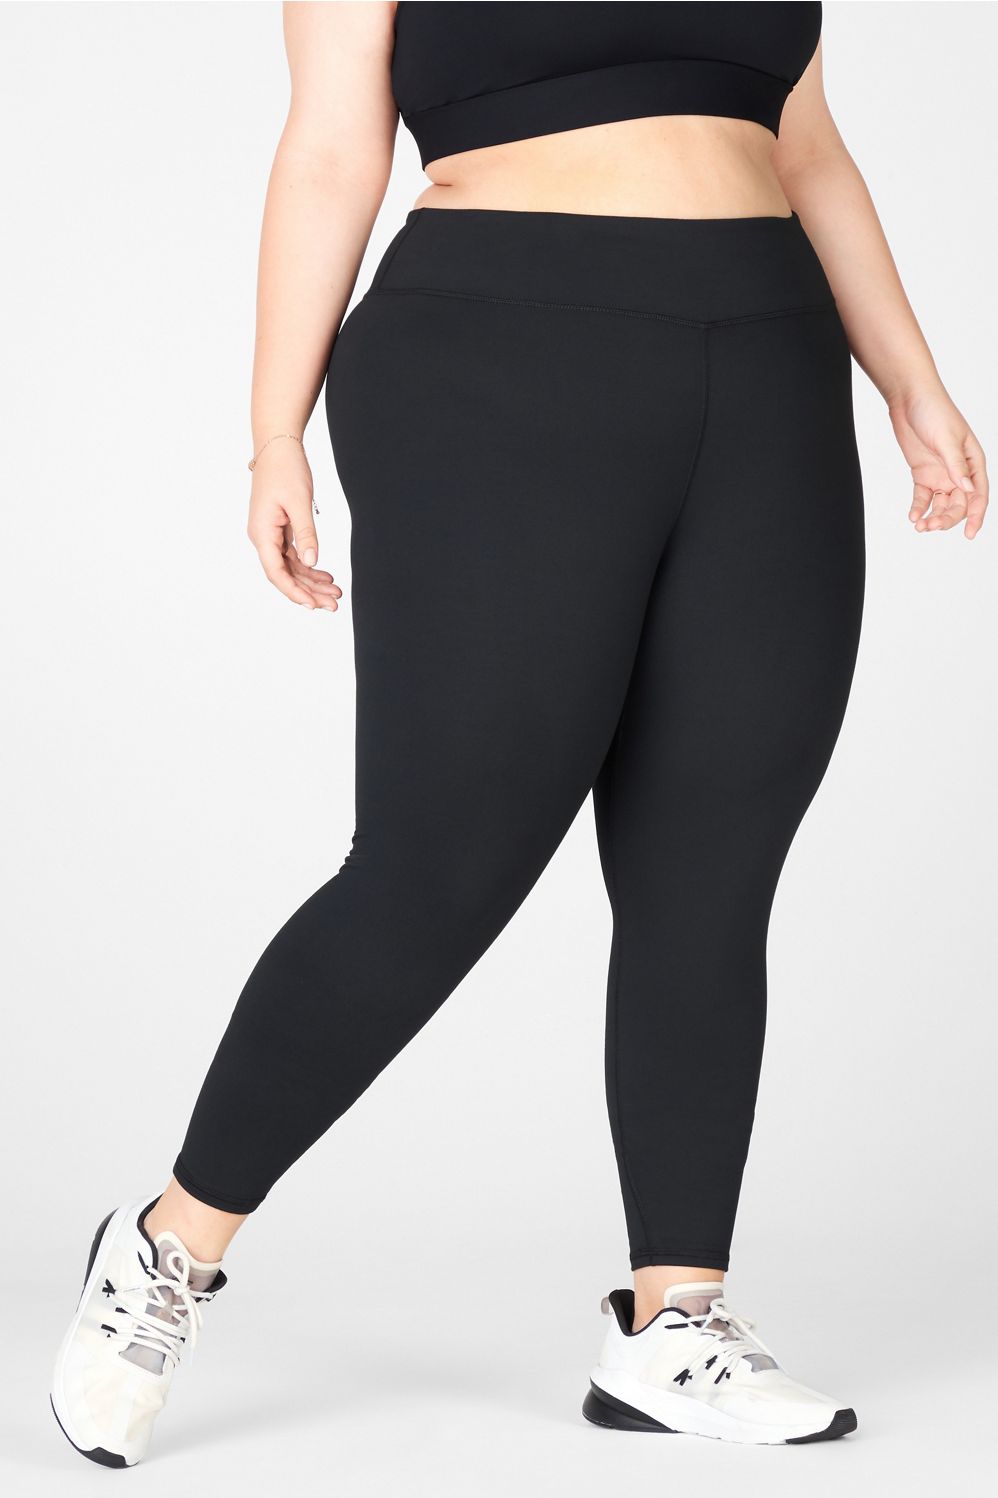 Fabletics Mid-Rise UltraCool Leggings Pink Size XS - $22 (70% Off